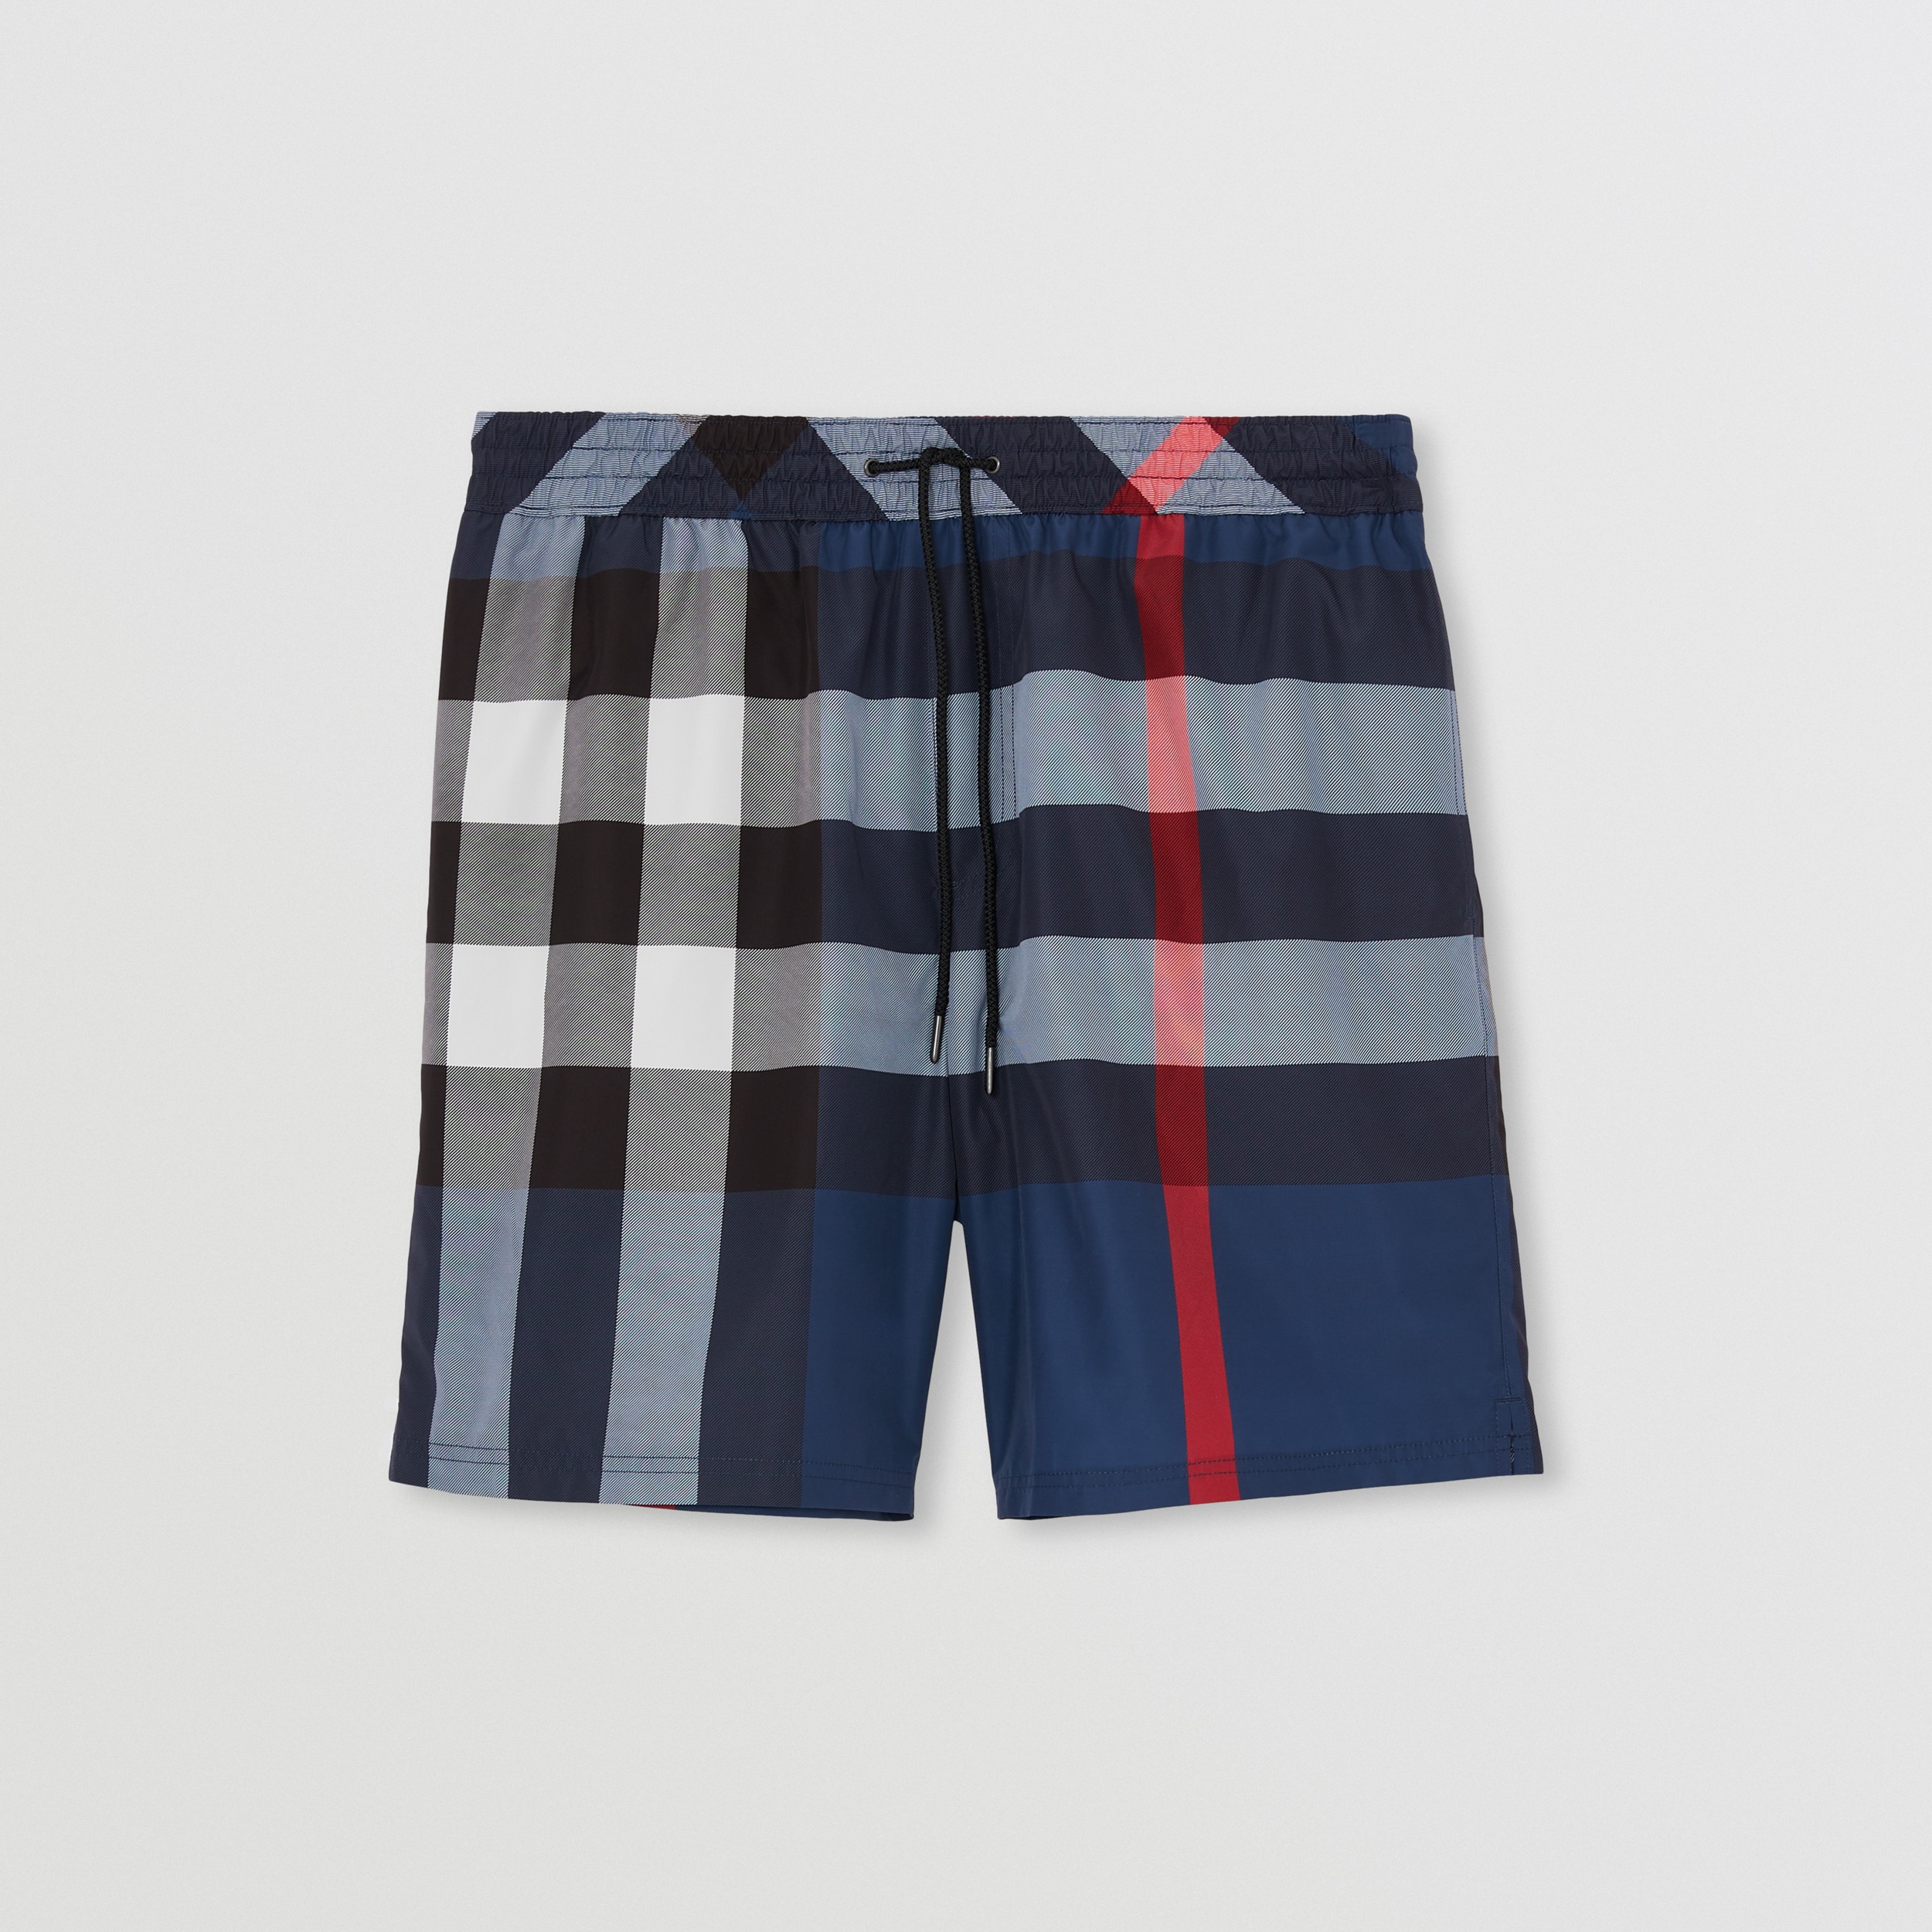 tage ned kokain Åre Check Drawcord Swim Shorts in Carbon Blue - Men | Burberry United States